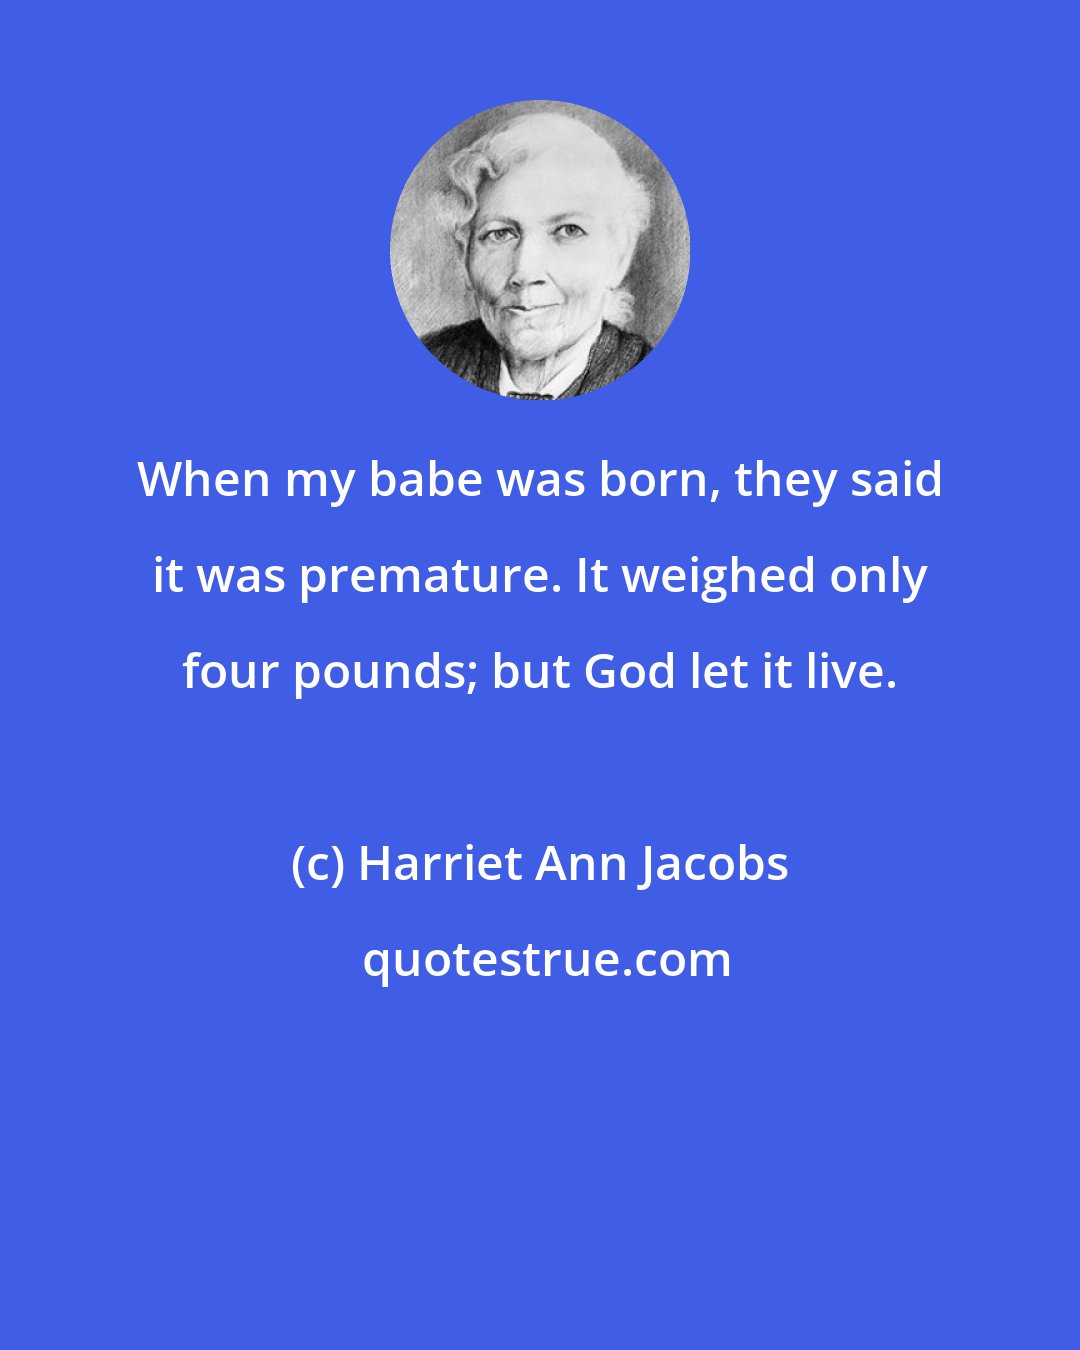 Harriet Ann Jacobs: When my babe was born, they said it was premature. It weighed only four pounds; but God let it live.